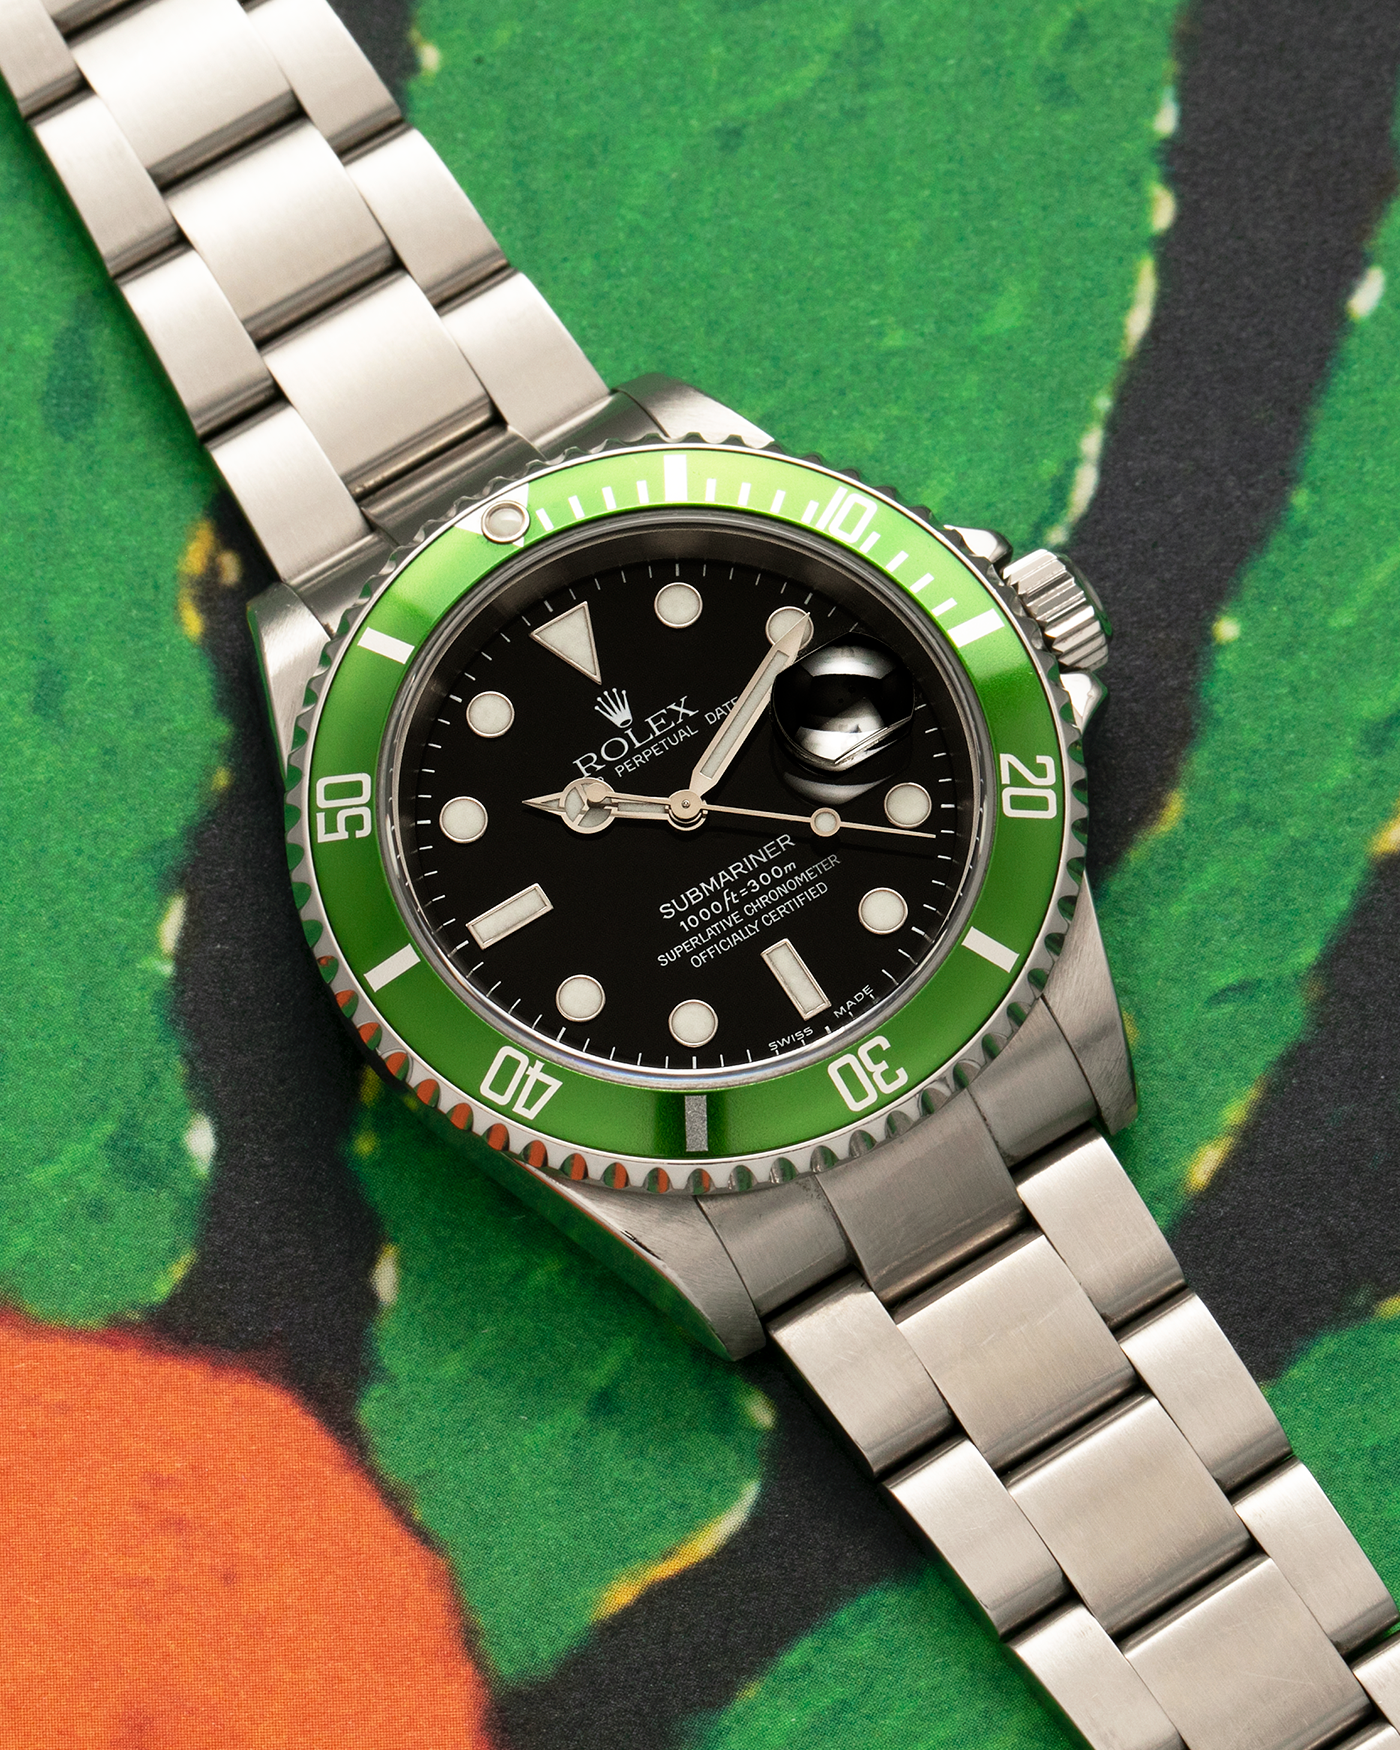 Brand: Rolex Year: 2004 Model: Submariner ‘Kermit’ Reference Number: 16610LV ‘Flat 4’ Serial Number: F Serial Material: Stainless Steel Movement: Rolex Cal. 3135, Self-Winding Case Diameter: 40mm Lug Width: 20mm Bracelet: Rolex Stainless Steel ‘93250’ Oyster Bracelet with signed ‘CL3’ Clasp